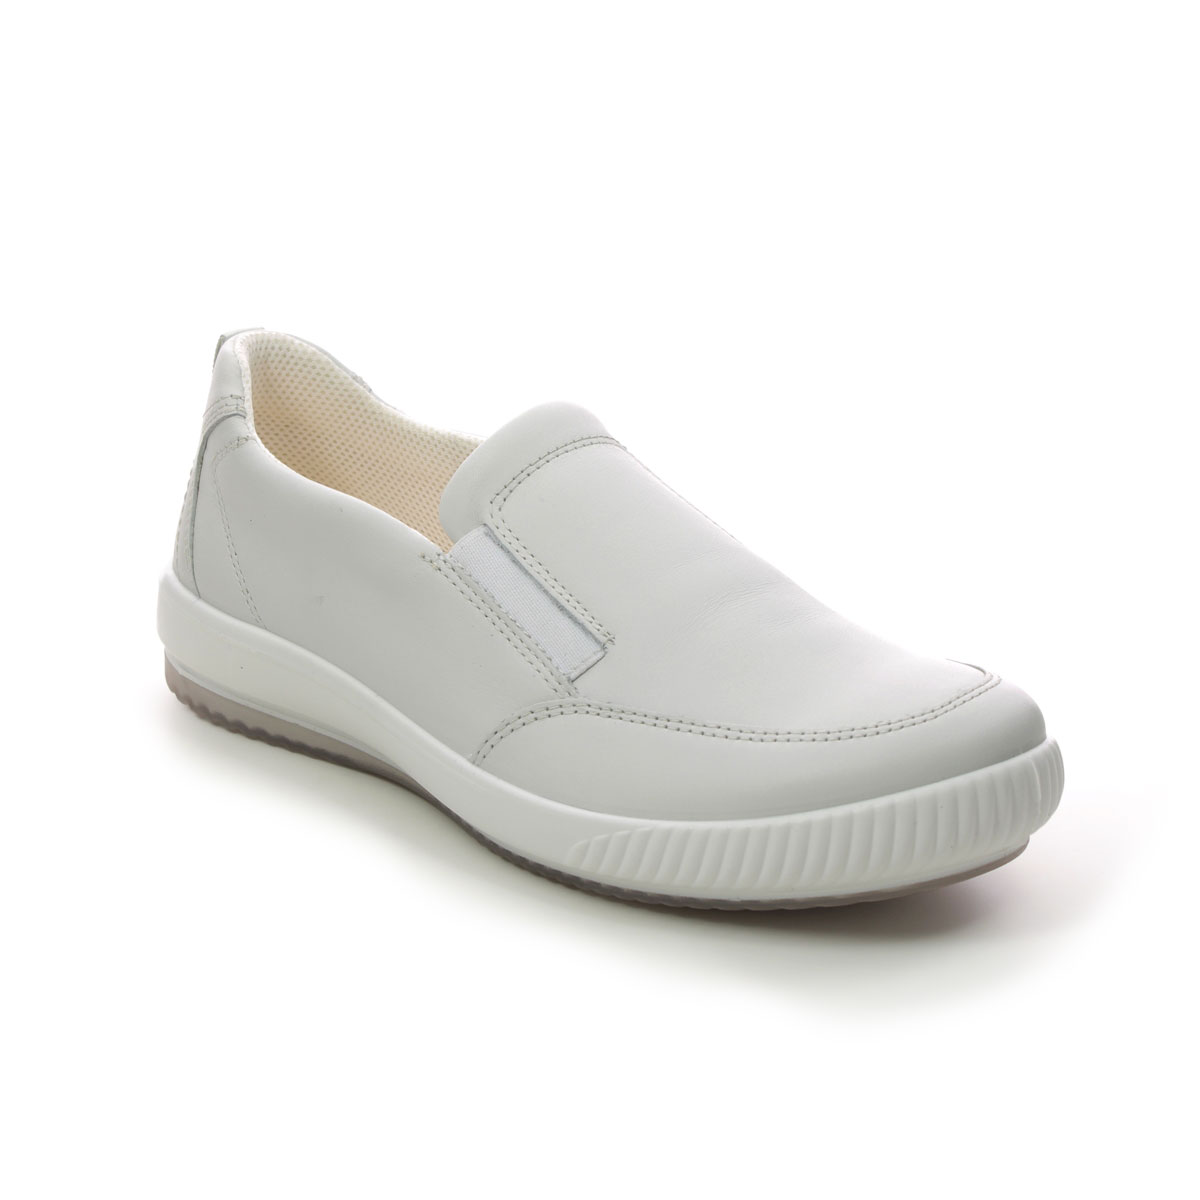 Legero Tanaro 5 Slip White Leather Womens Comfort Slip On Shoes 2000215-1000 In Size 5.5 In Plain White Leather